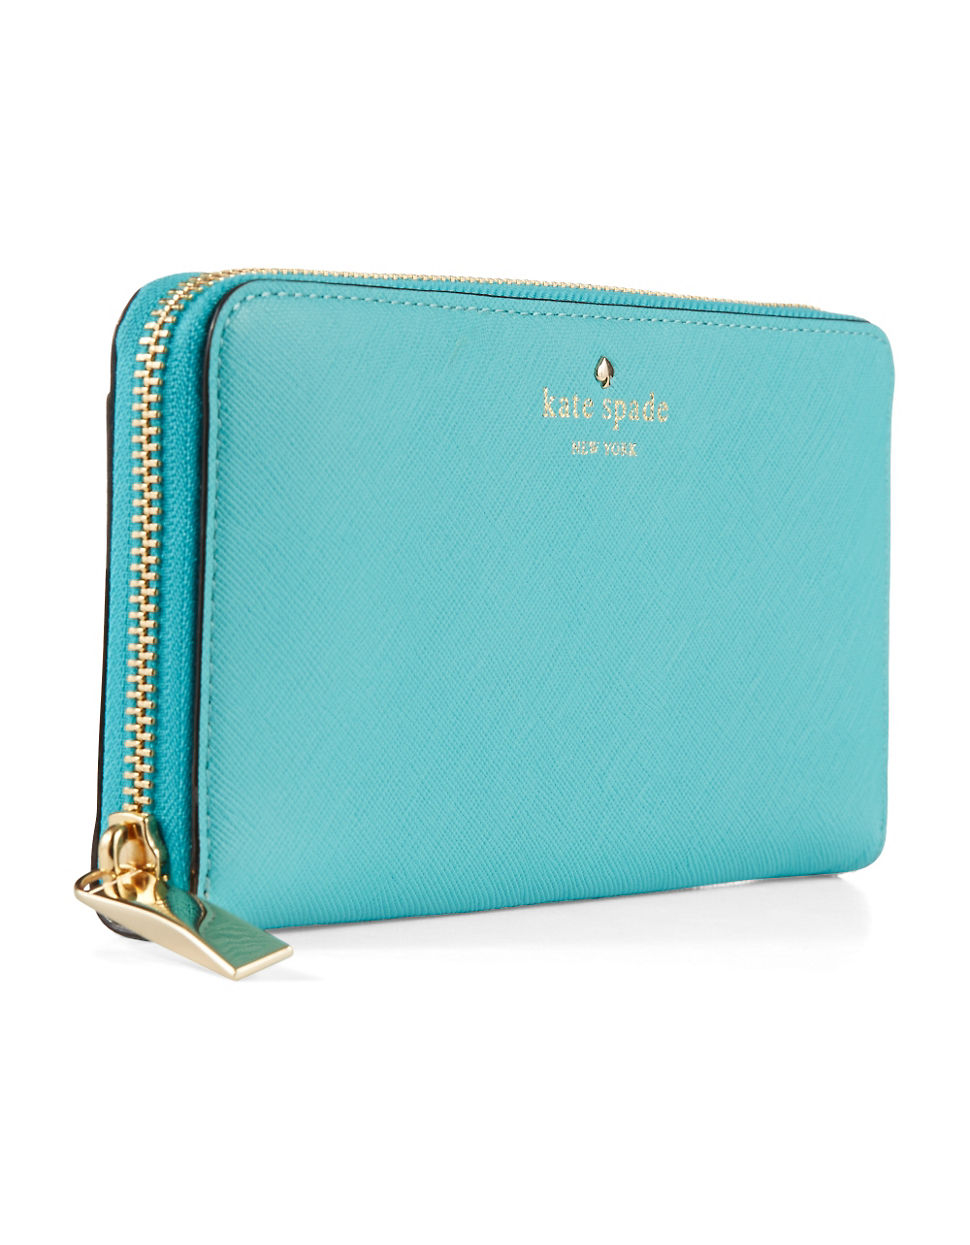 Kate Spade Cherry Lane Lacey Wallet in Blue (Tropic Blue) | Lyst